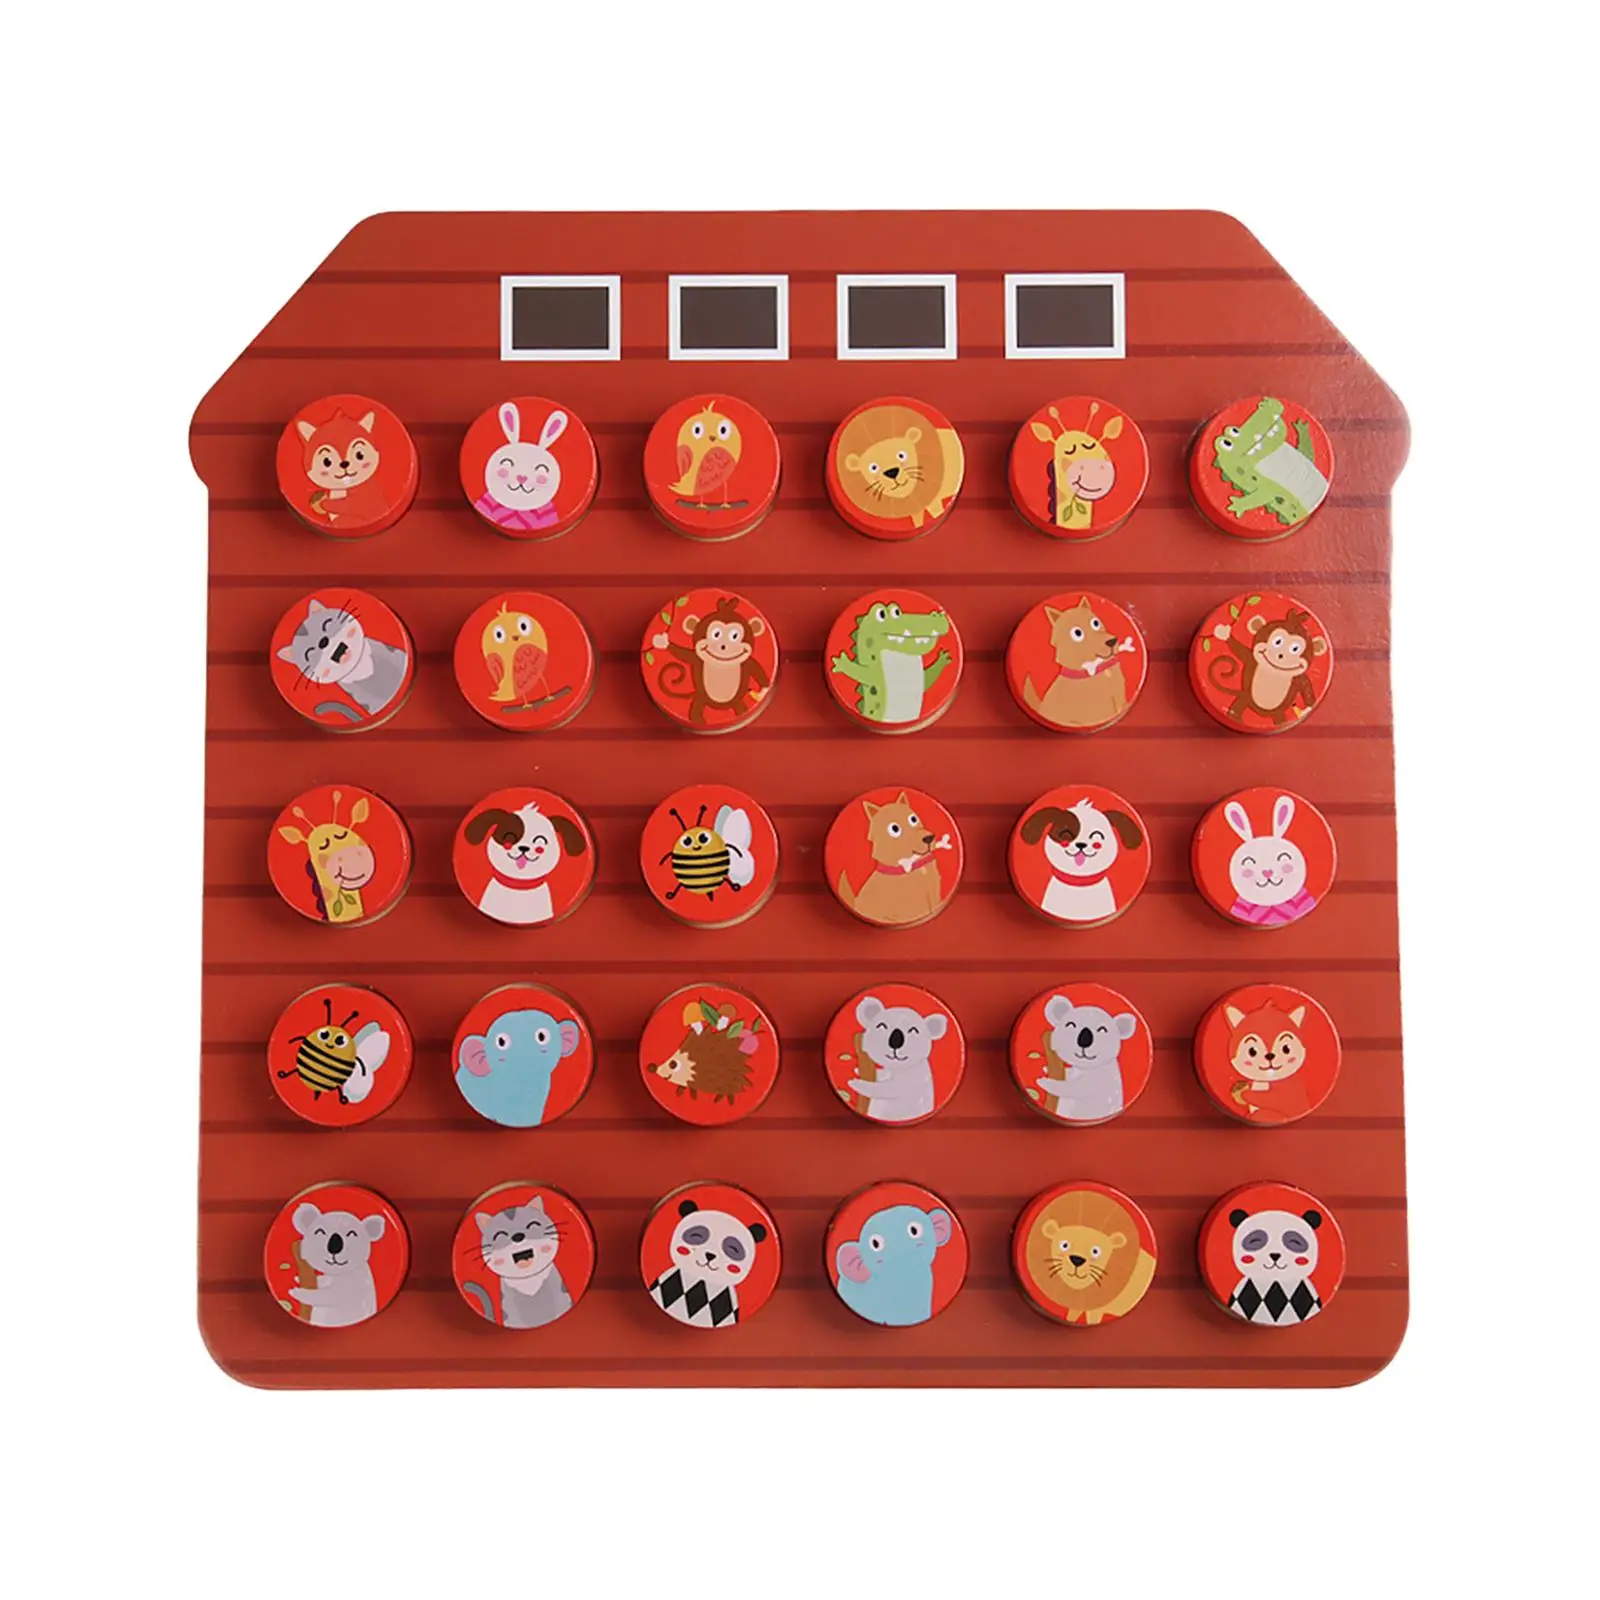 Wooden Chess Board Teaser Toys Portable Cognitive Memory Board Game Classic